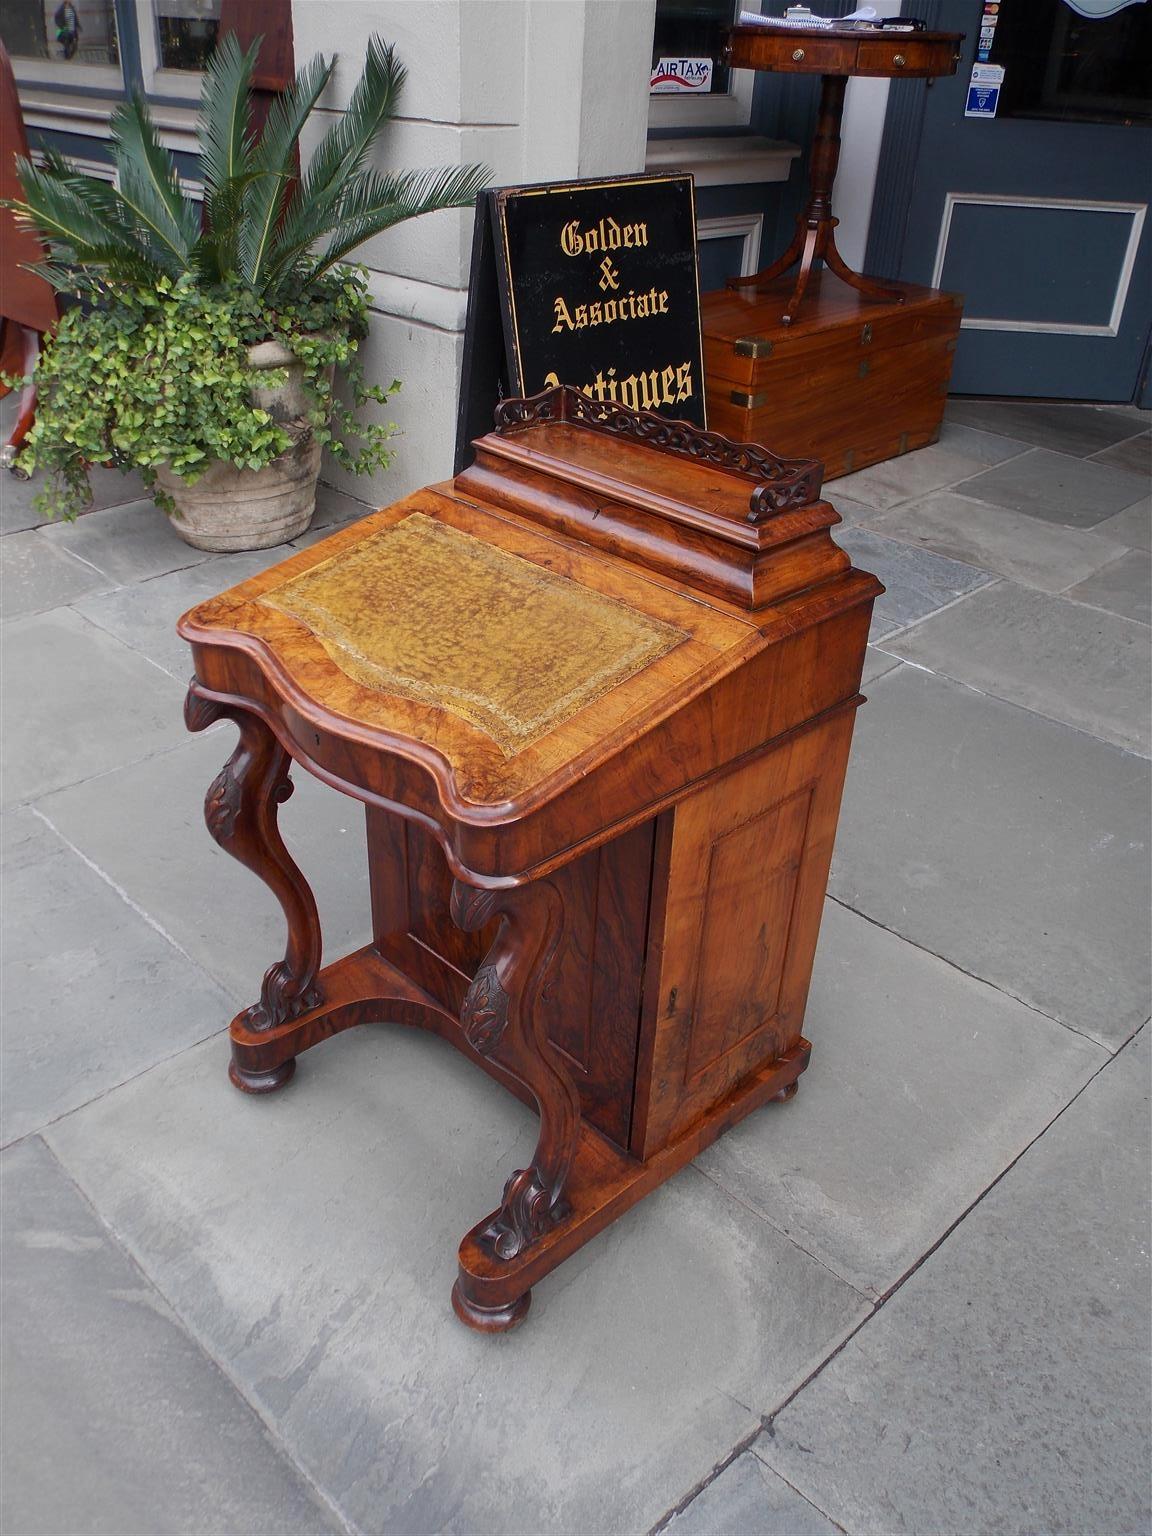 Hand-Carved English Burl Walnut Leather Top Davenport with Acanthus Cabriole Legs Circa 1840 For Sale